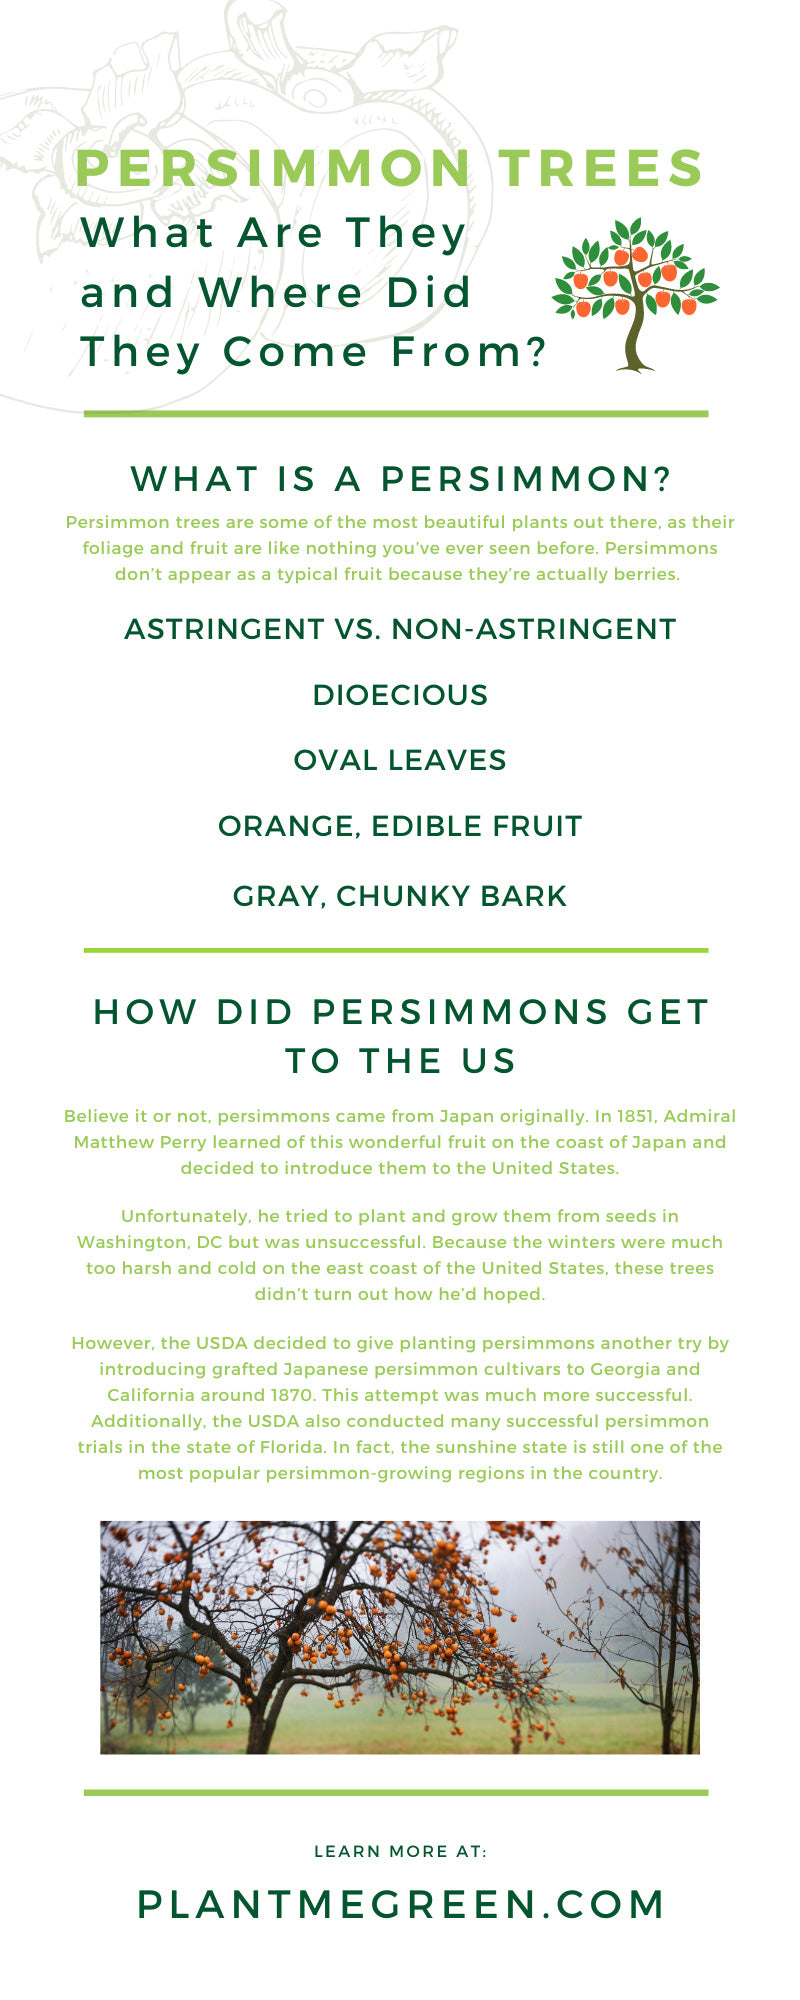 Persimmon Trees: What Are They and Where Did They Come From?